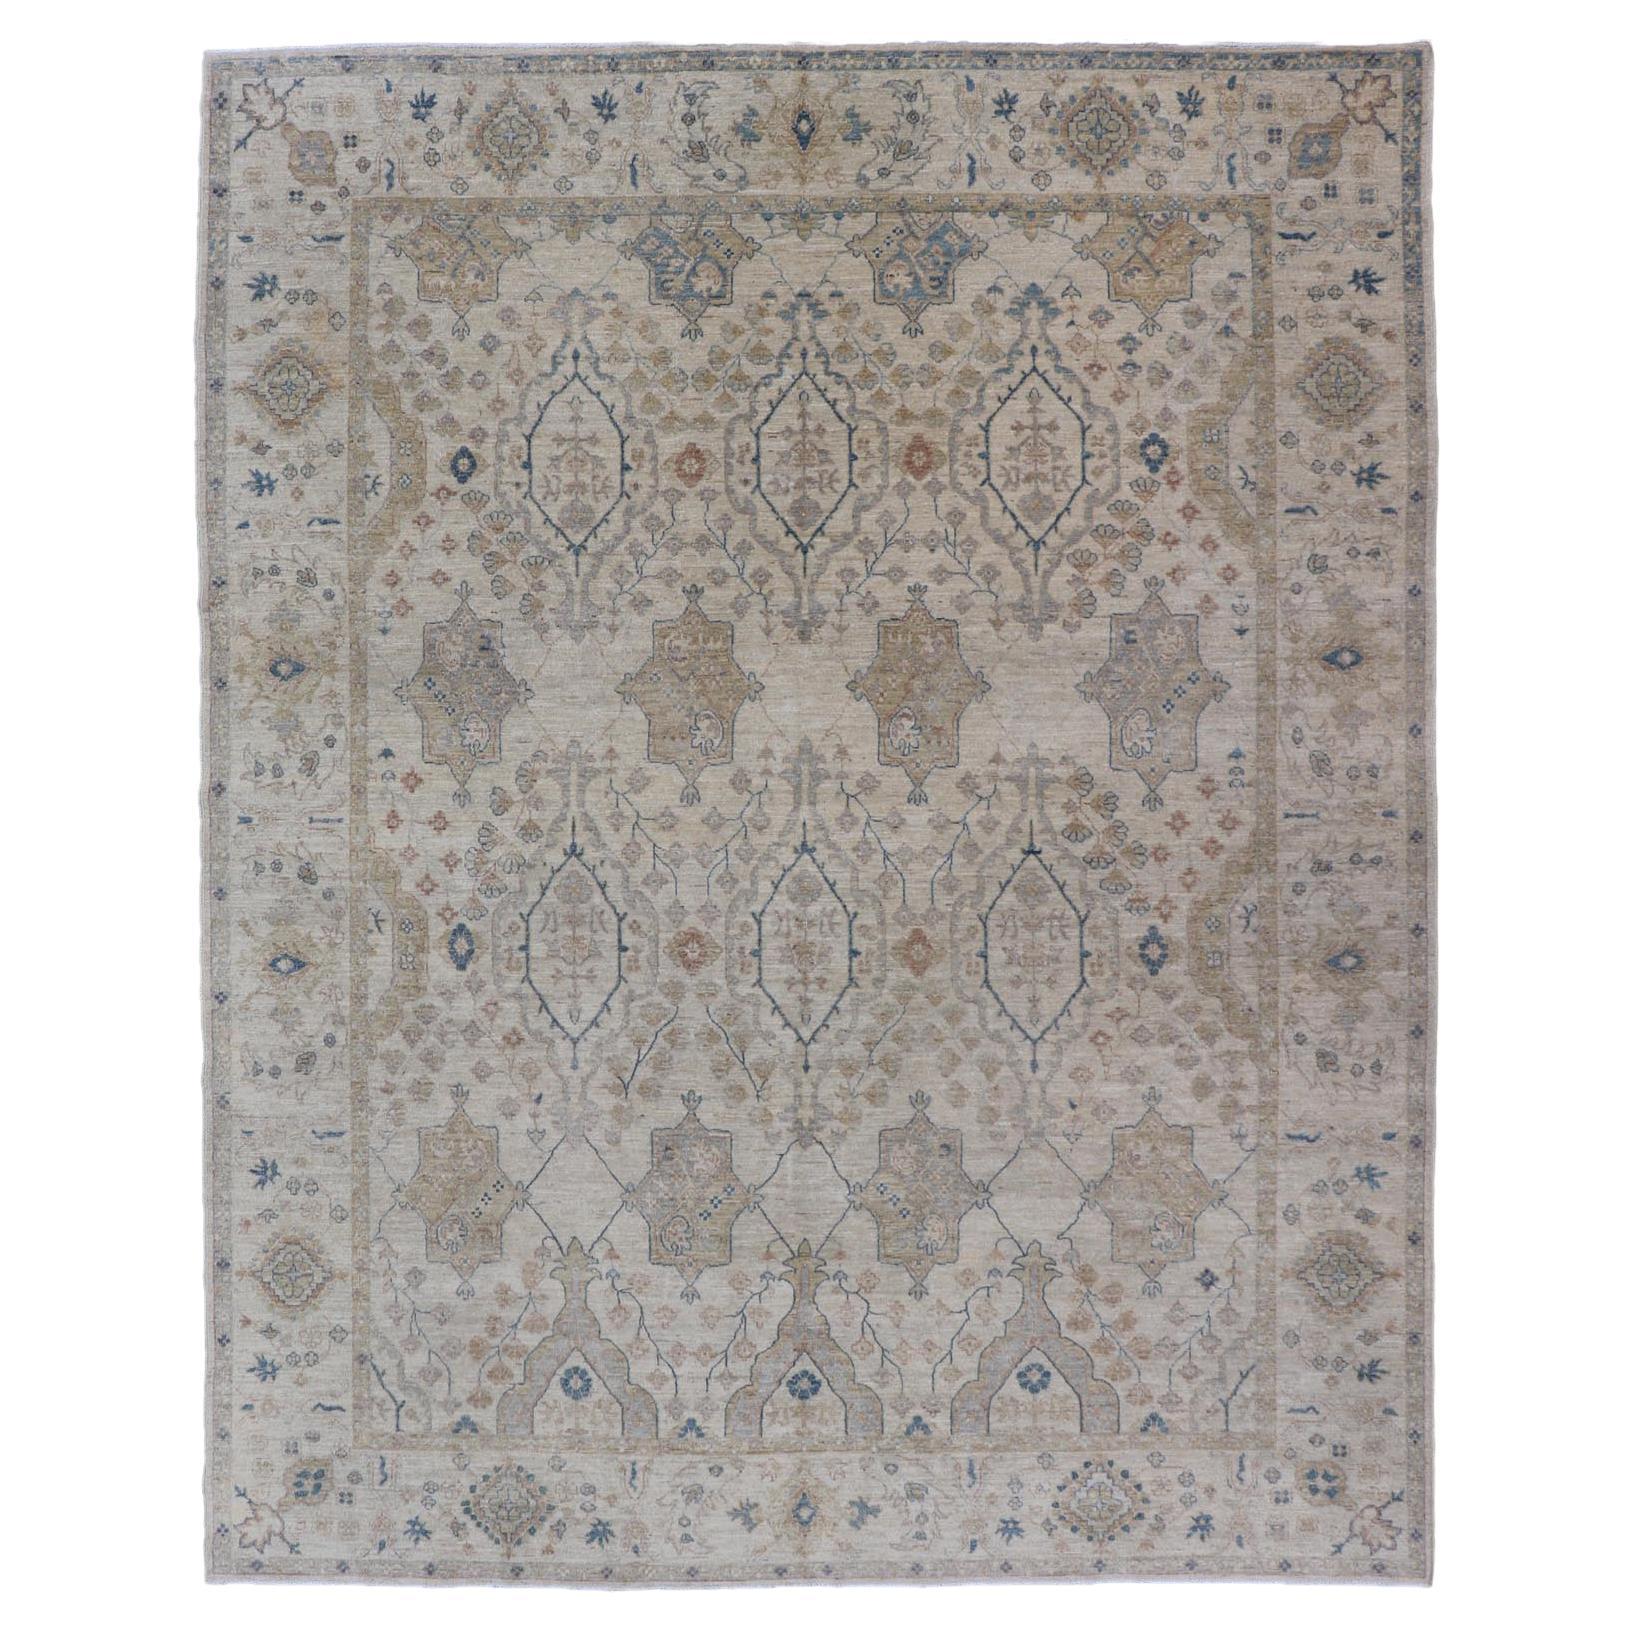  Afghan Khotan Rug with All-Over Geometric Pattern in Tan, Taupe, and Light Blue For Sale